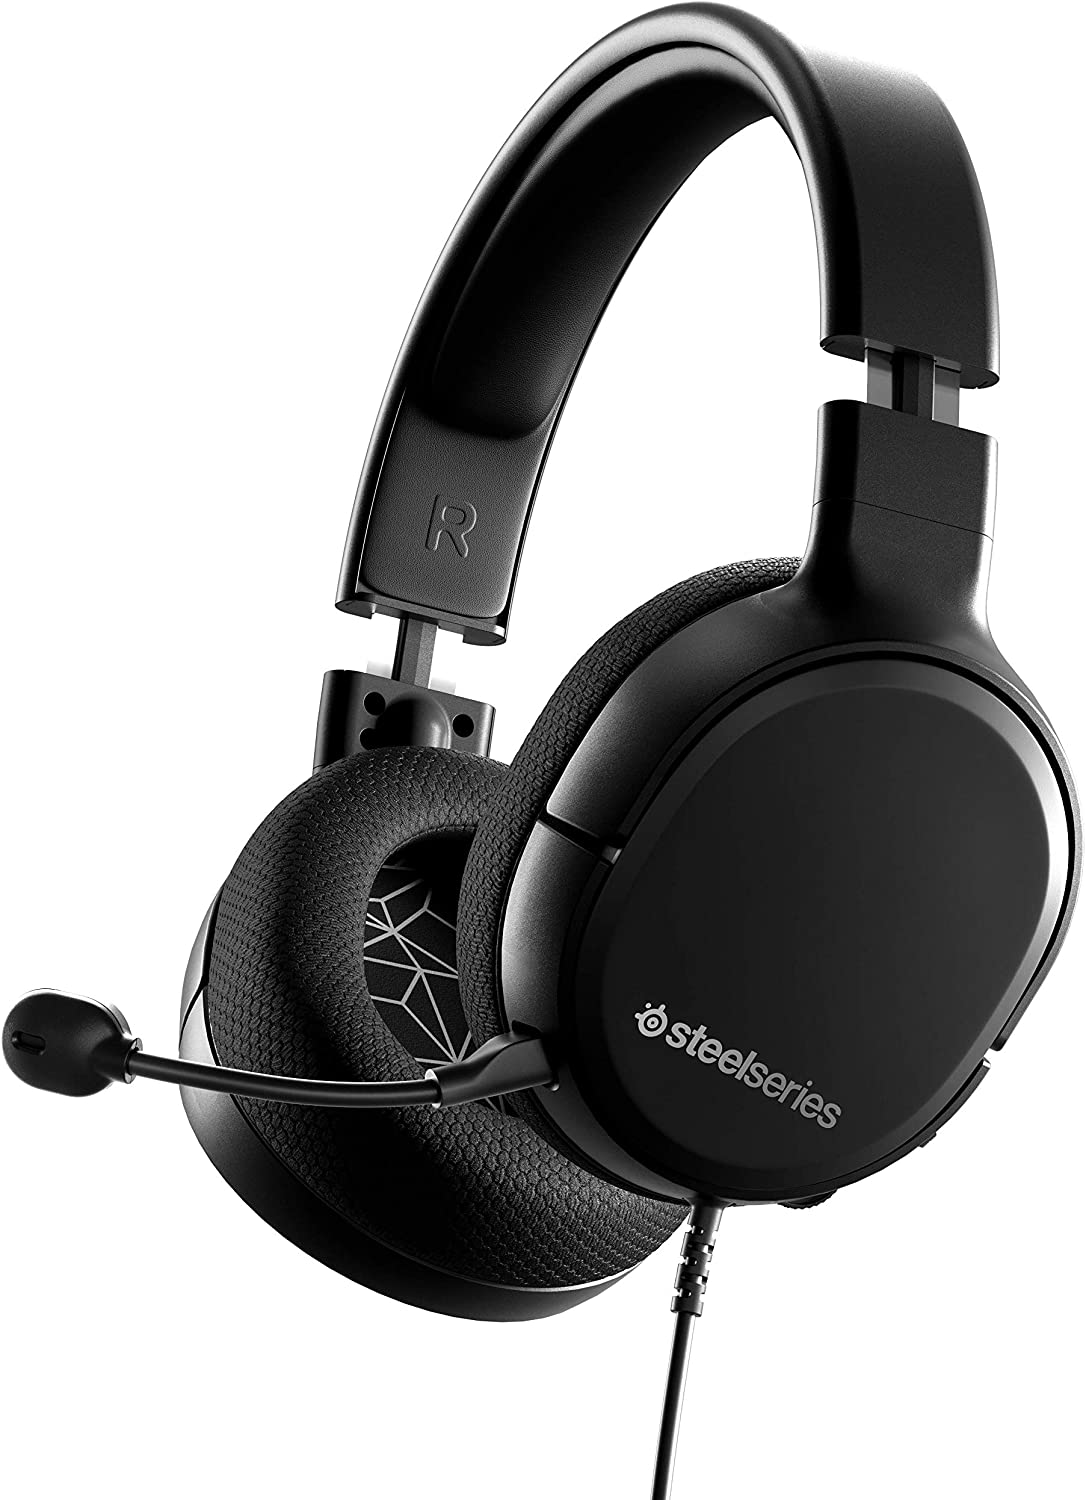 SteelSeries Arctis 1 Wired Gaming Headset (Prme Deal) $24.99